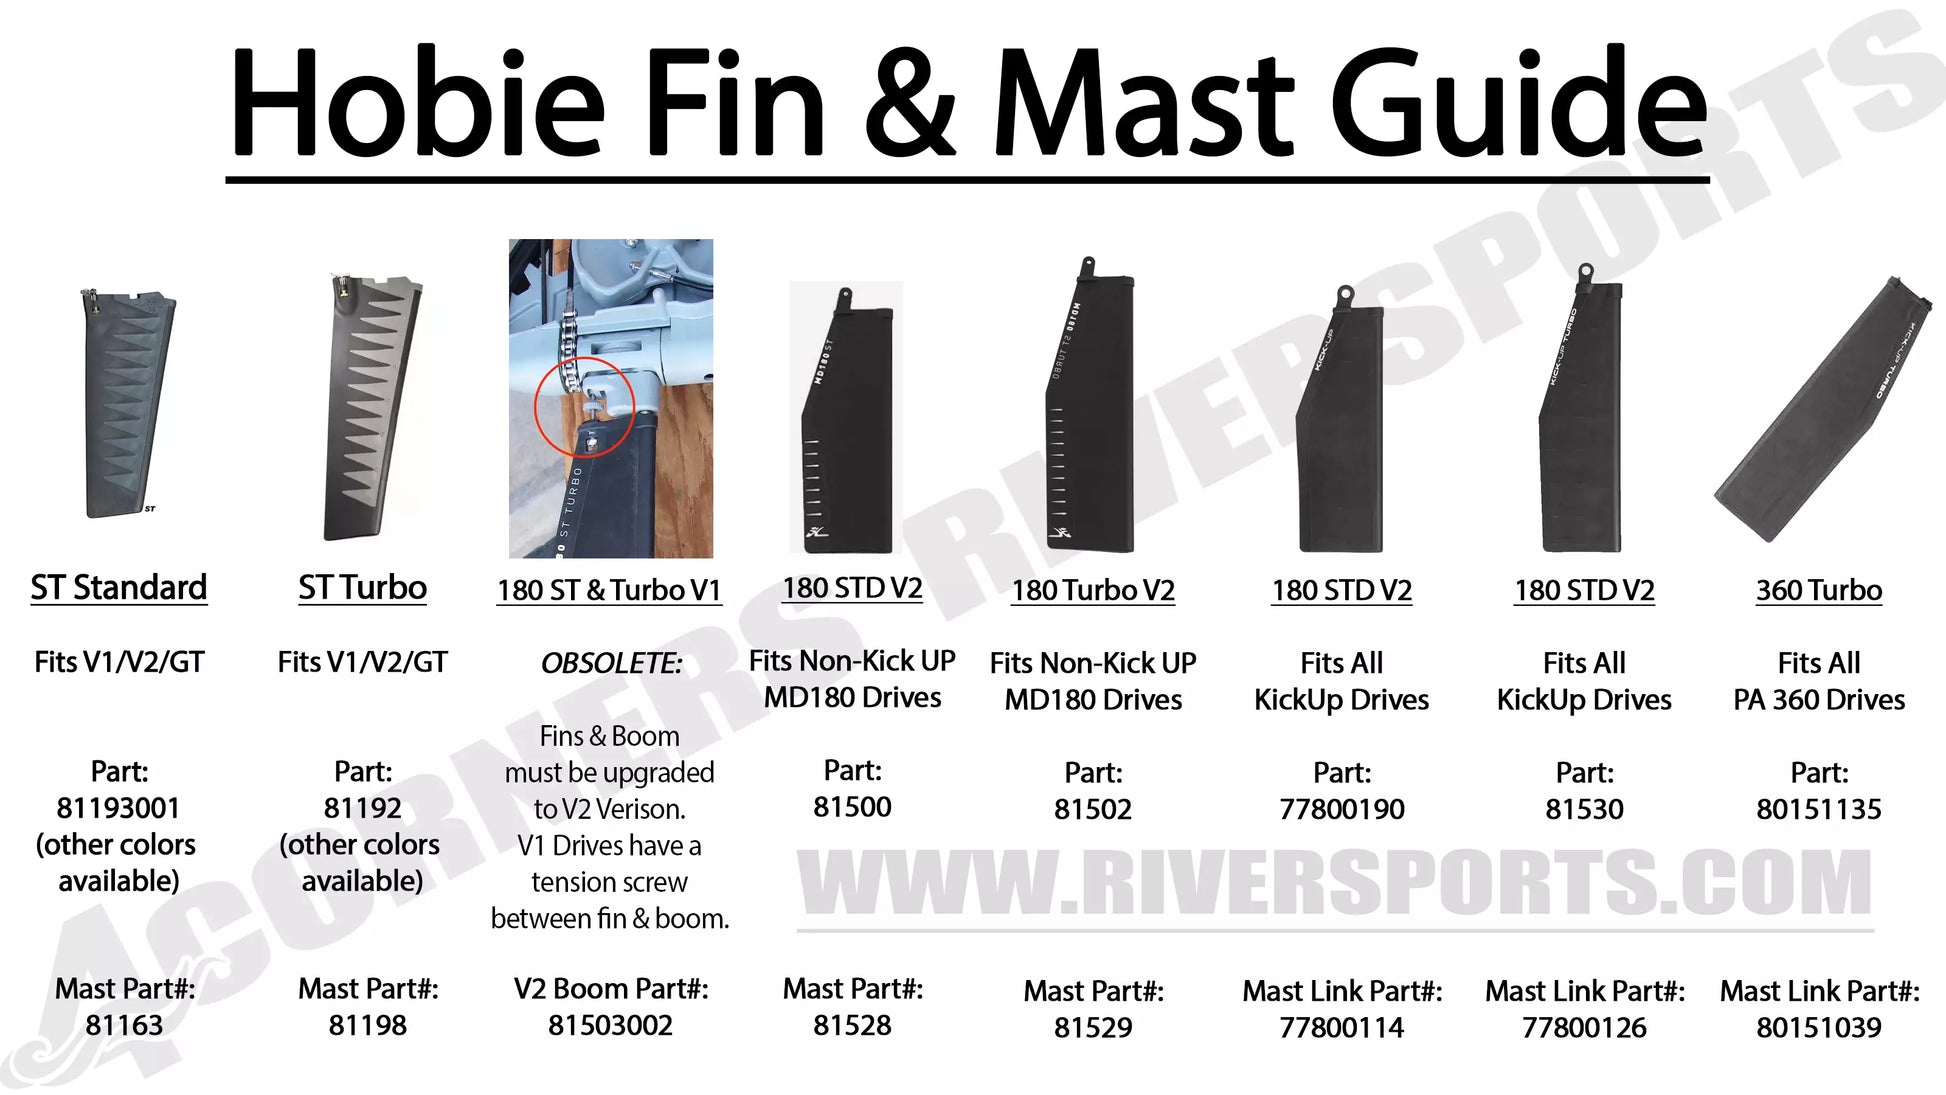 Upgrade your Hobie fin and mast guide with a V2 Boom for MD180 Drive.